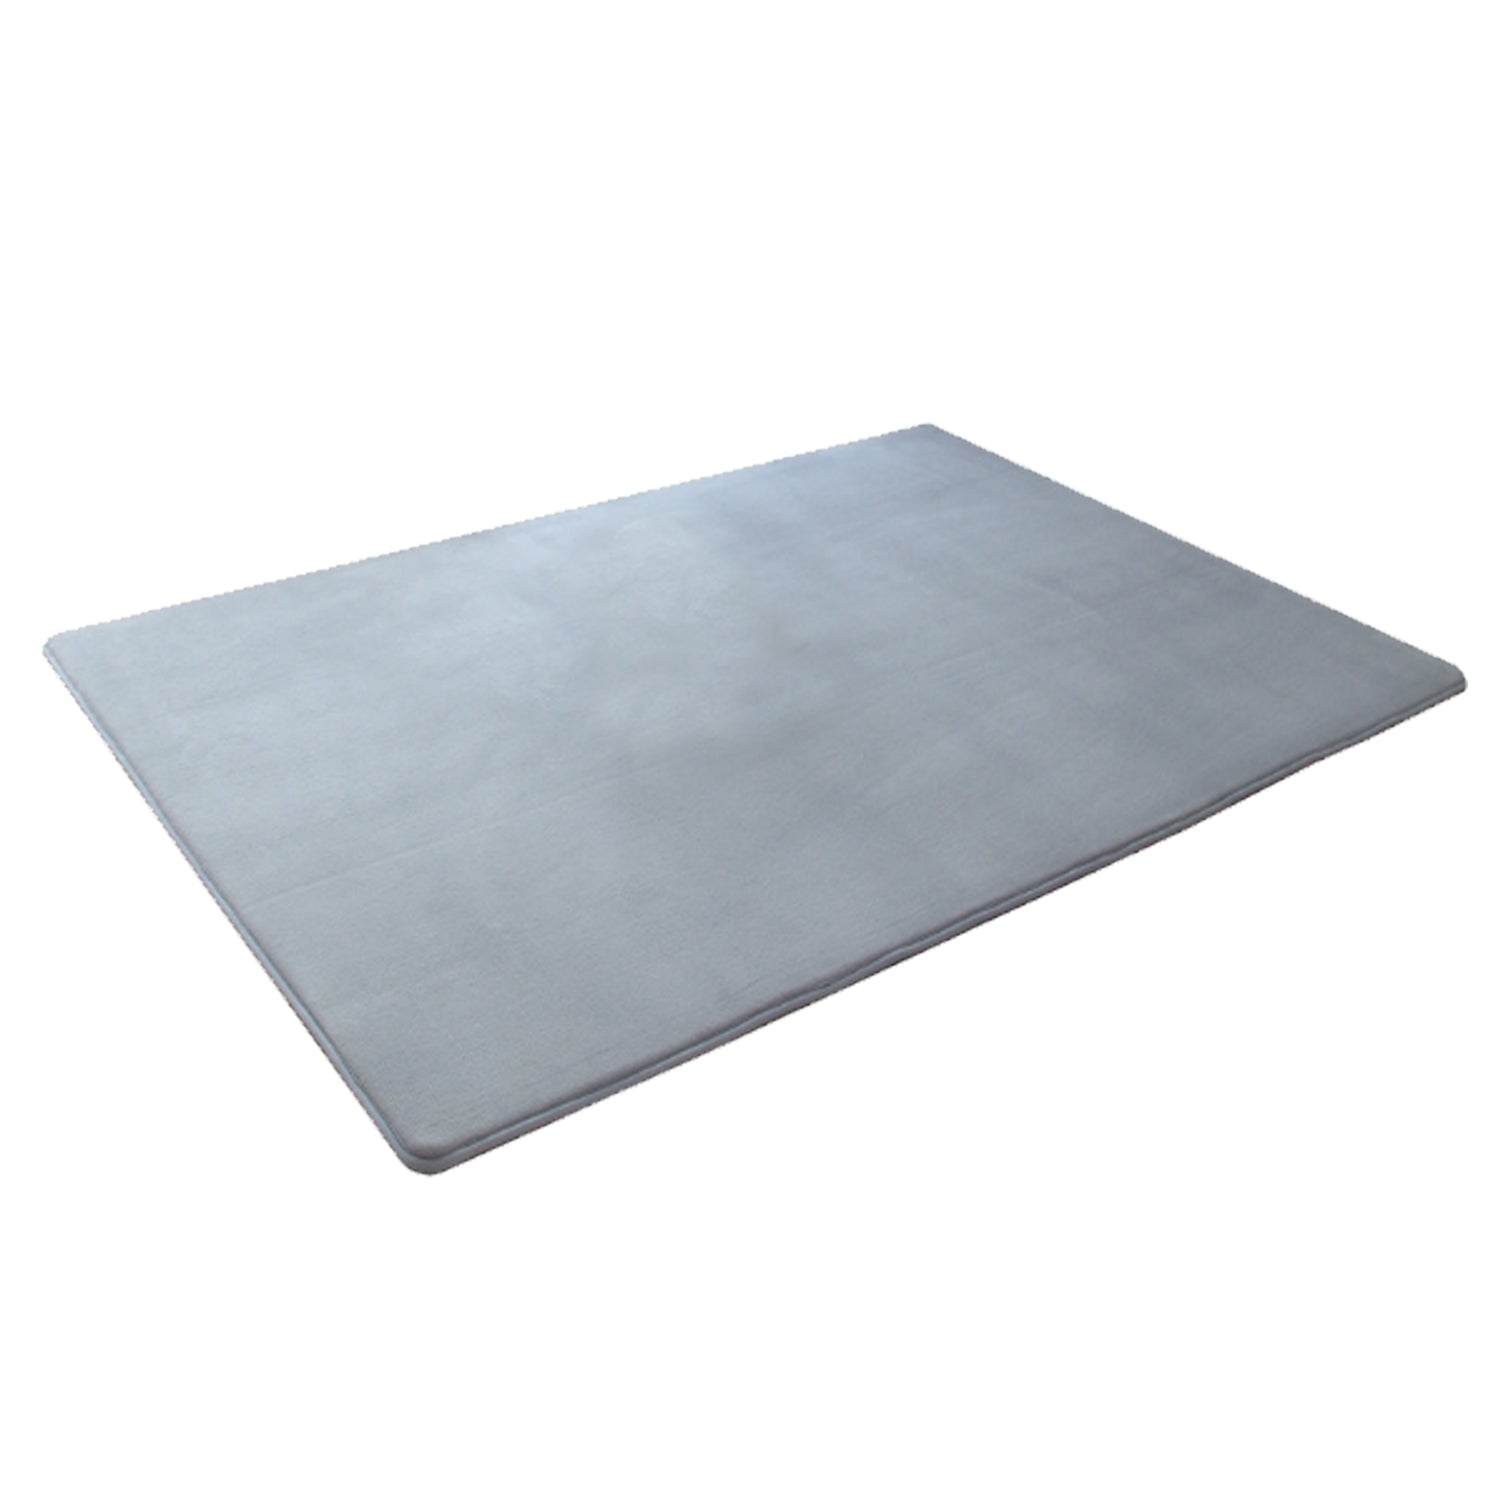 Arrowzoom Anti-Vibration Sound Absorbing Damping Soundproof Noise Mats for Piano - KK1248 Gray / 160 x 80cm /63 x 31 x .3 in